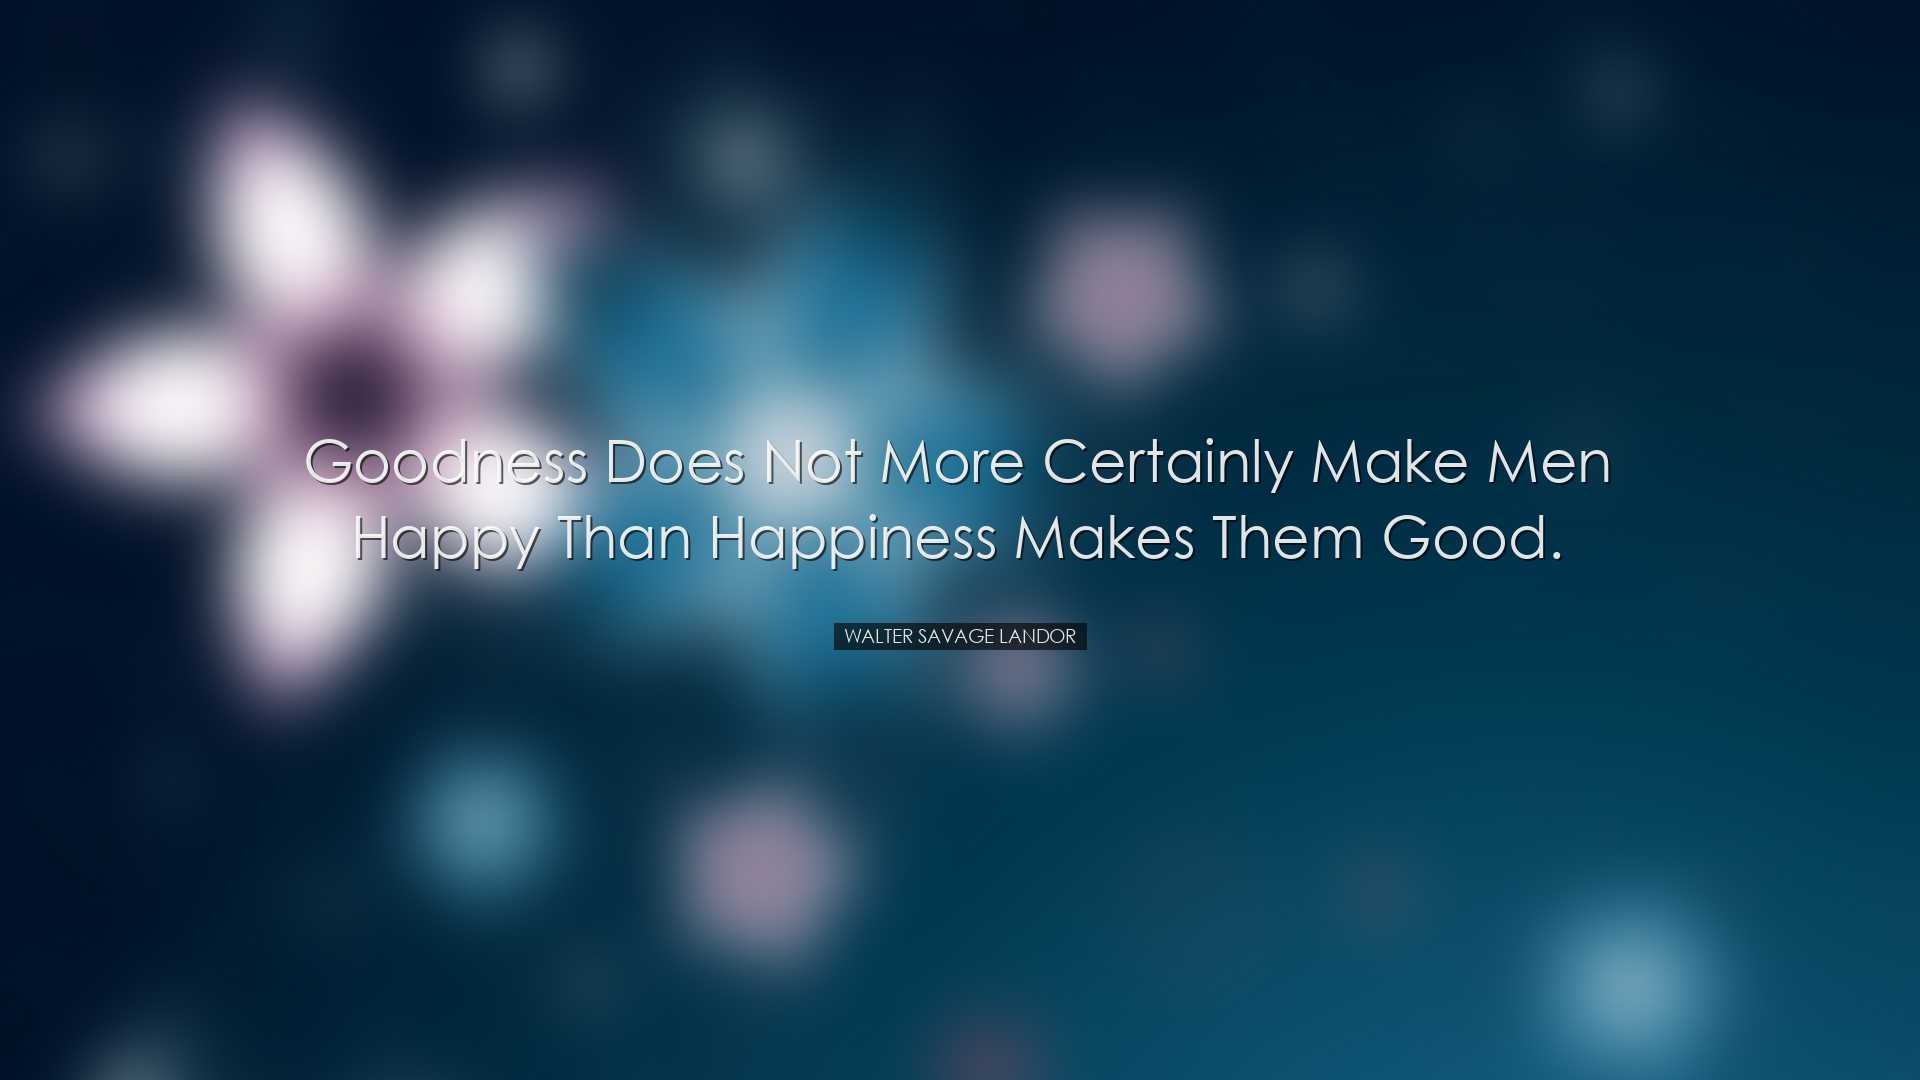 Goodness does not more certainly make men happy than happiness mak